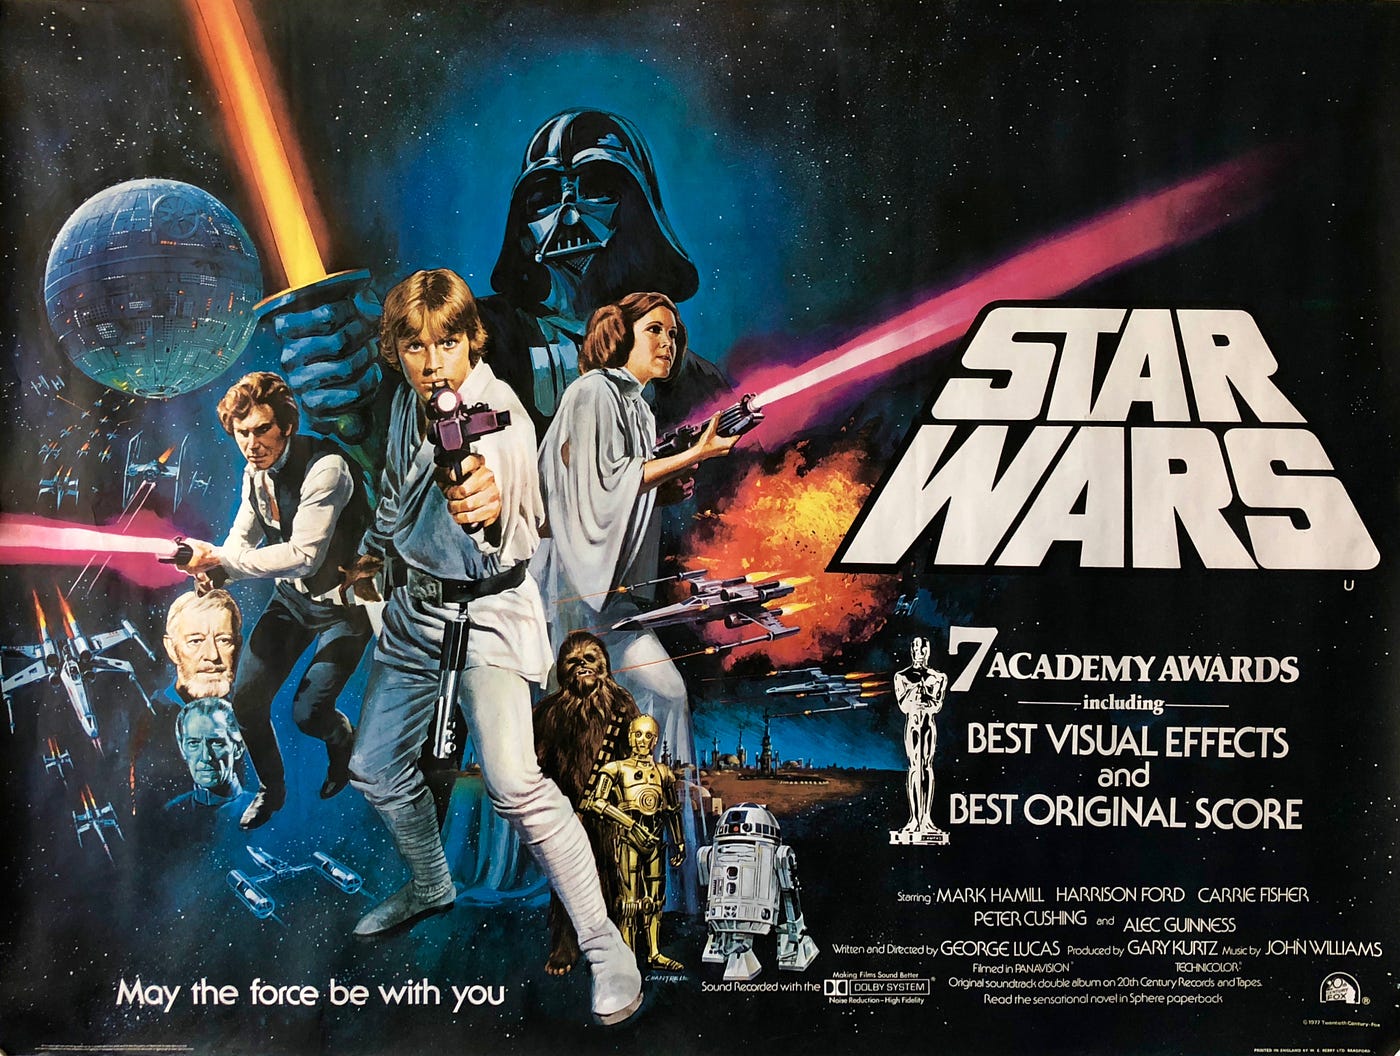 Is the Star Wars series considered a classic in the science fiction genre?